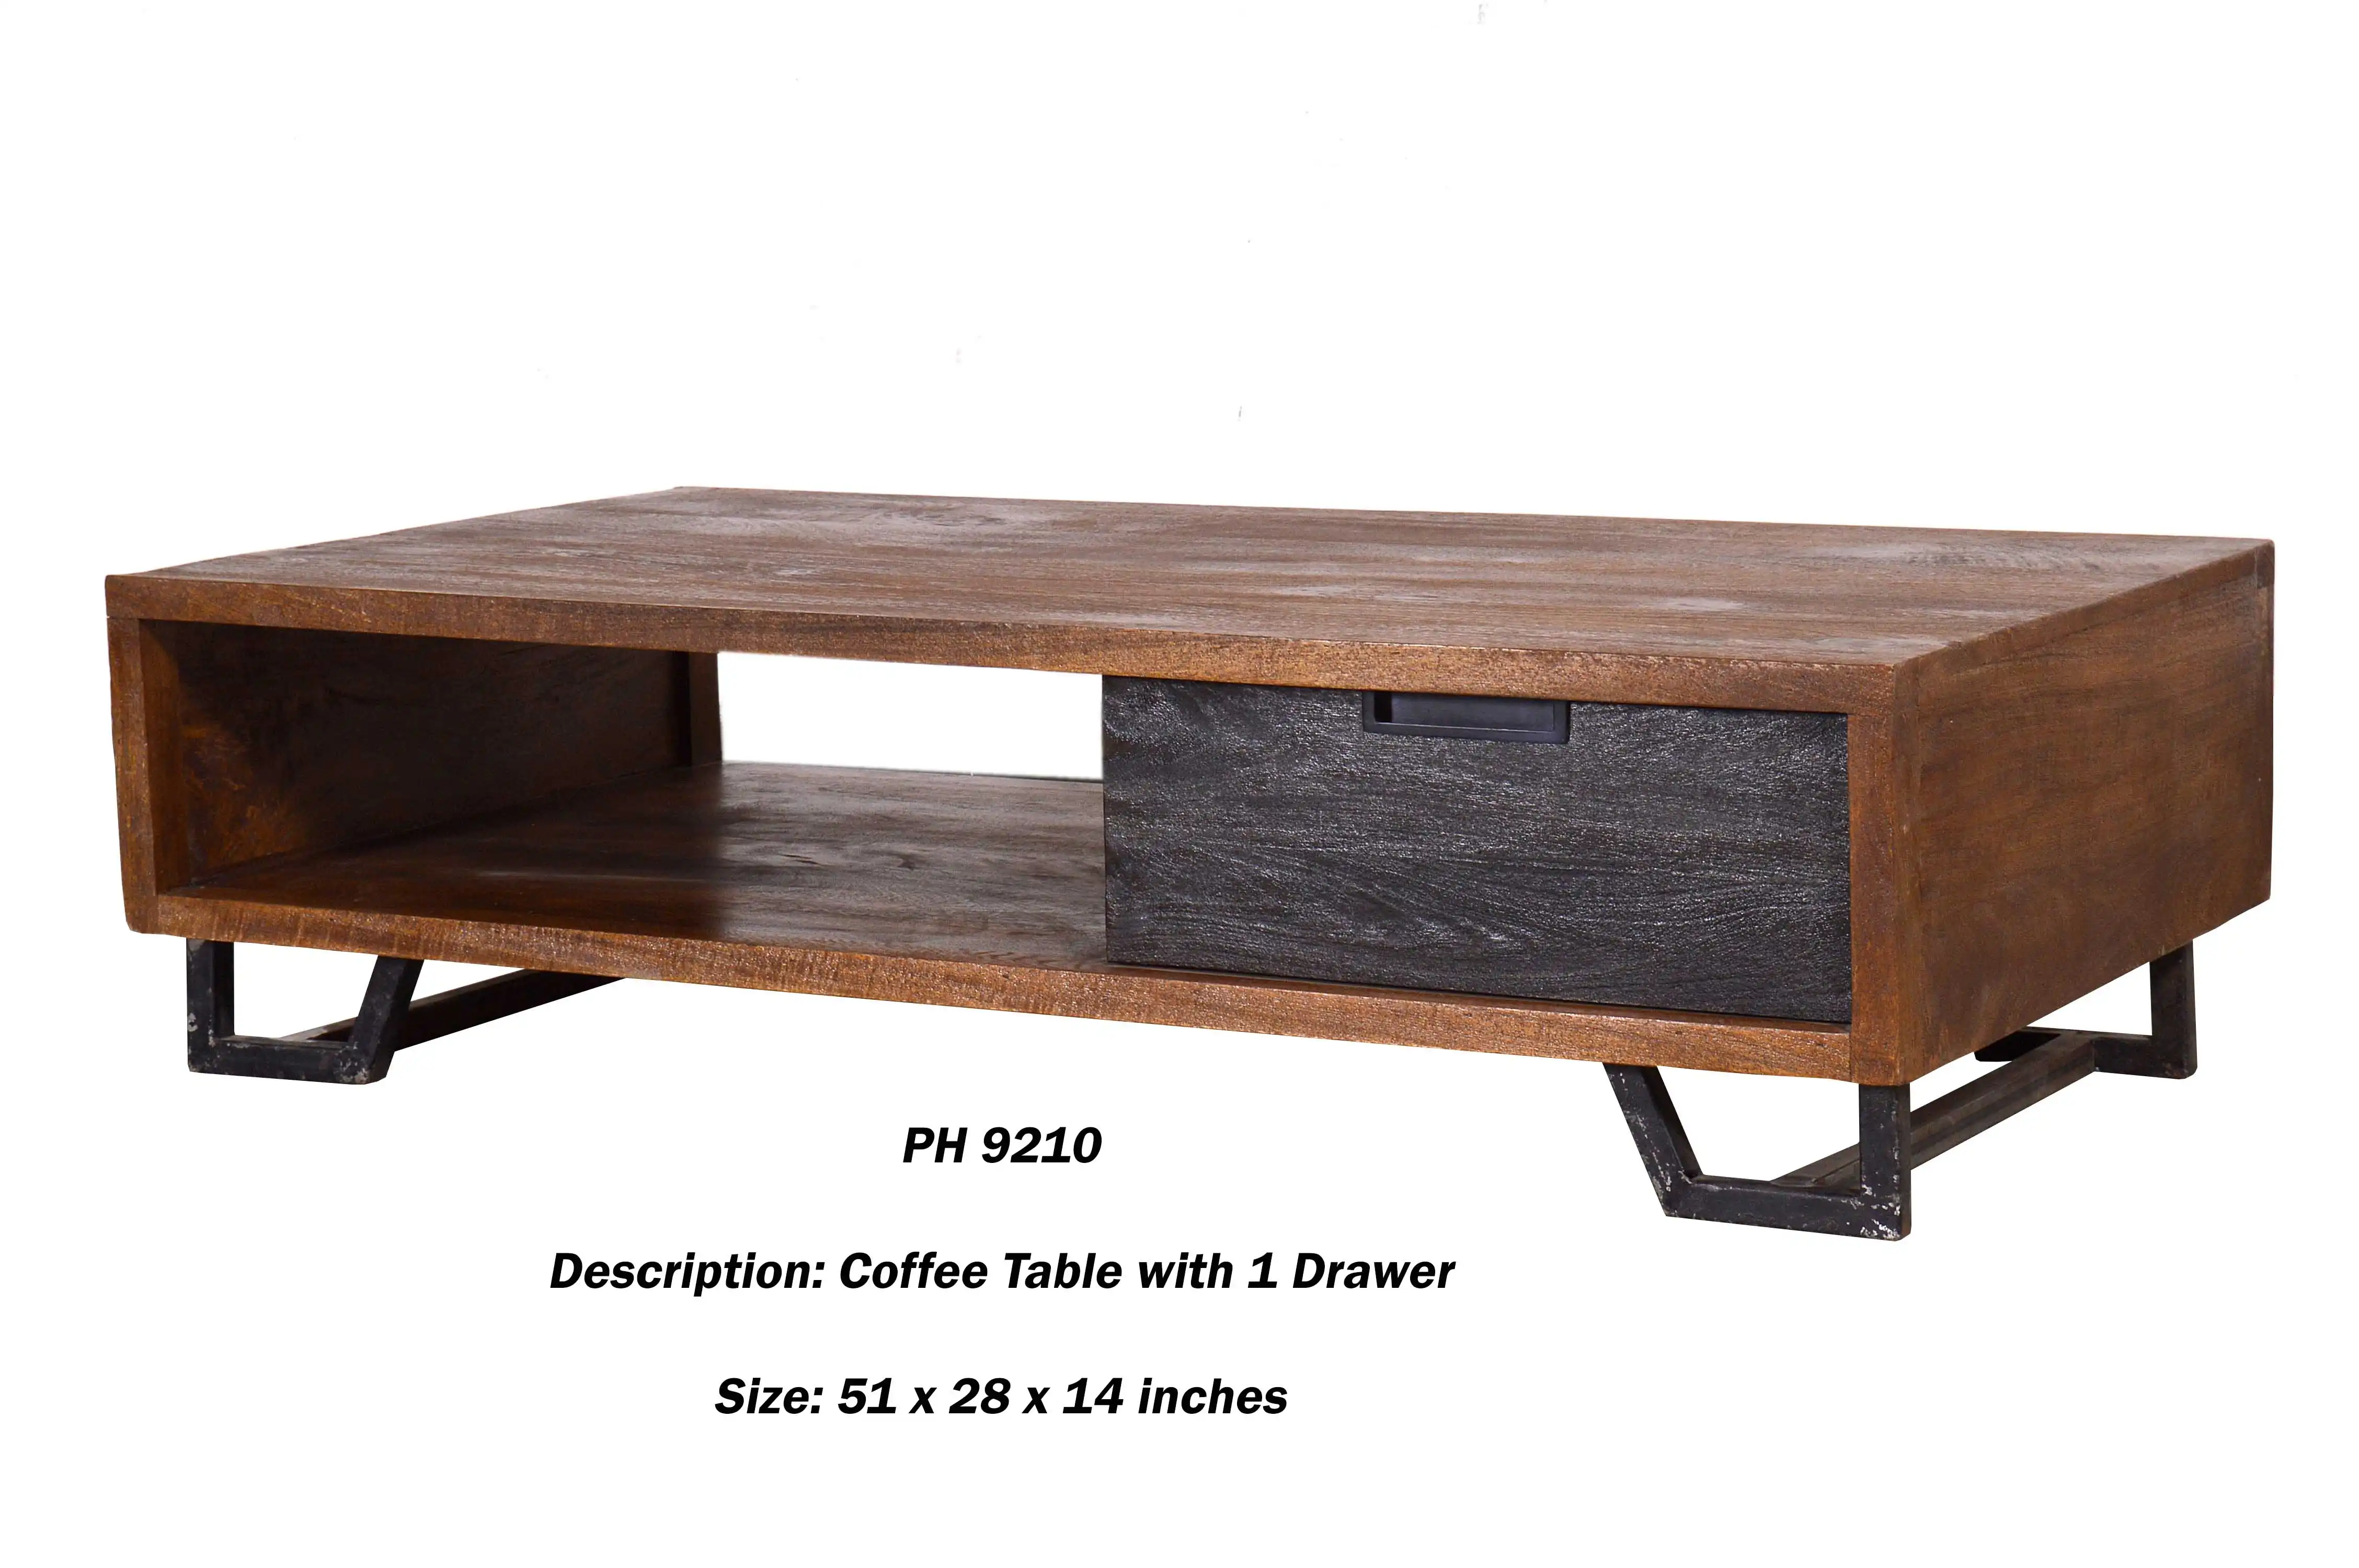 Coffee Table with 1 Drawer
(KD) - popular handicrafts